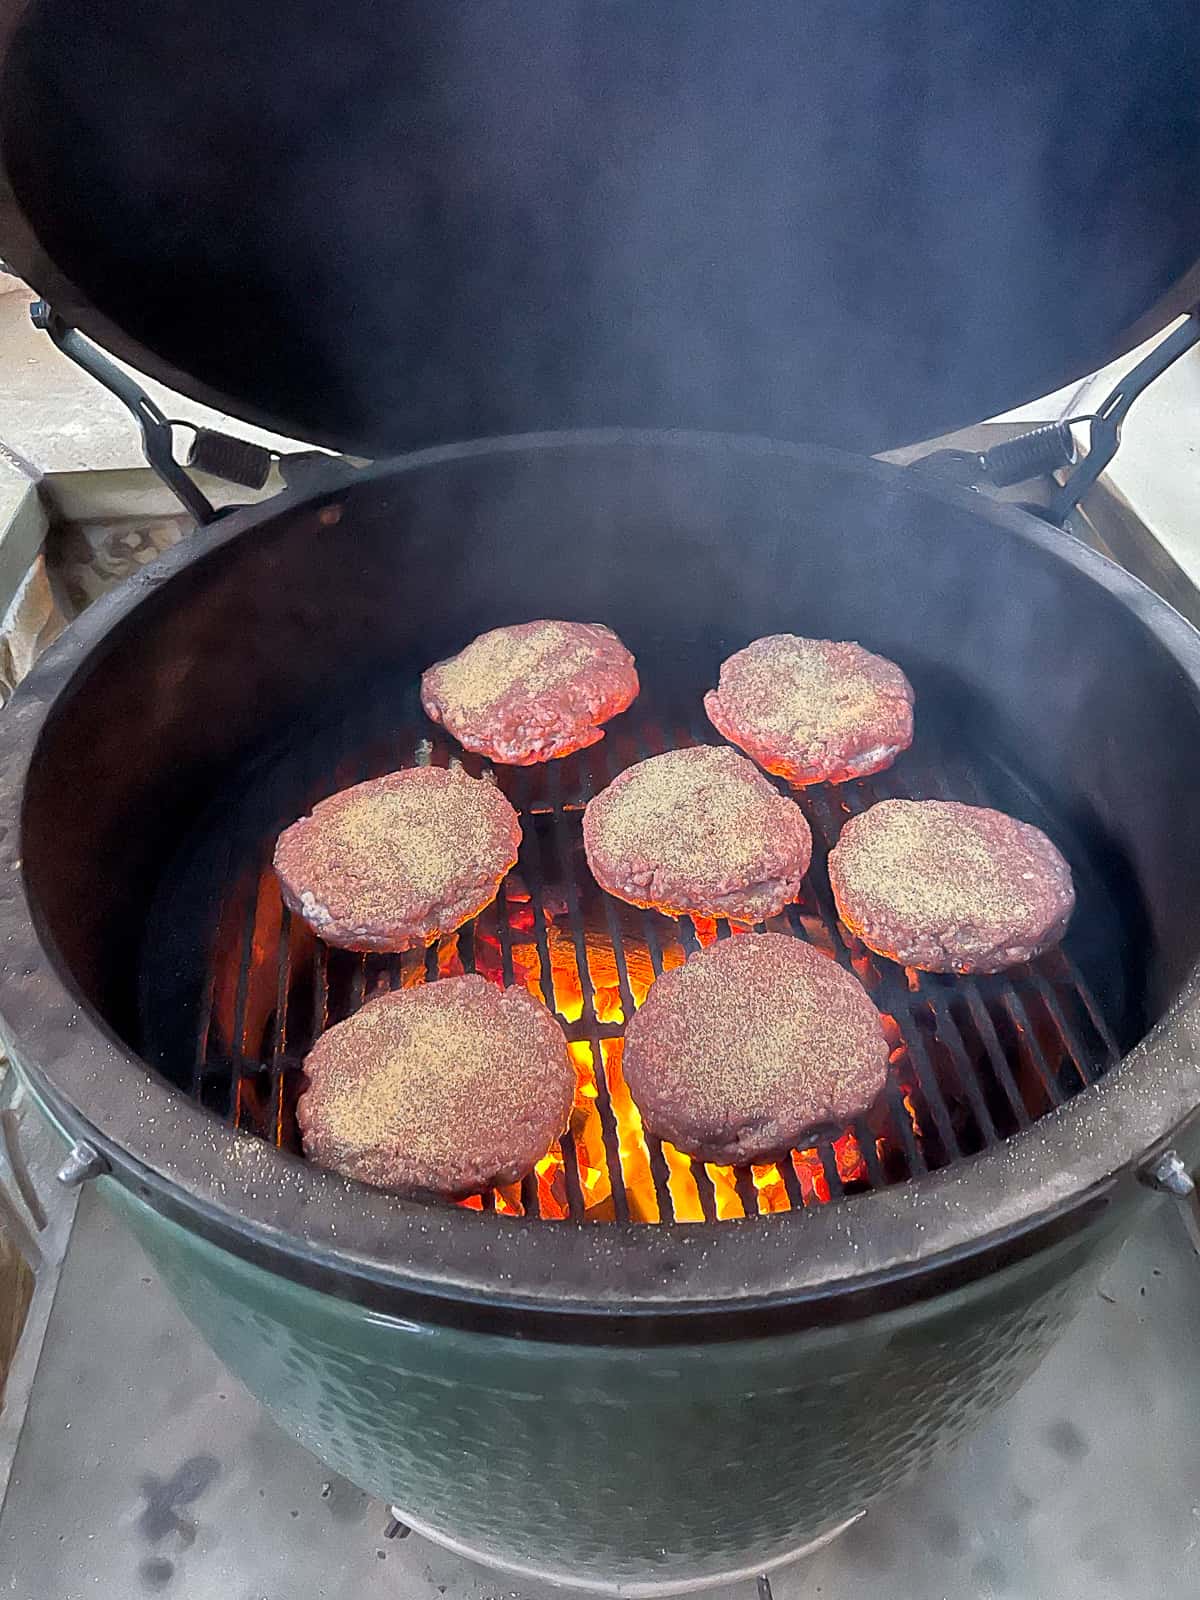 A bunch of burgers on our Big Green Egg grill.